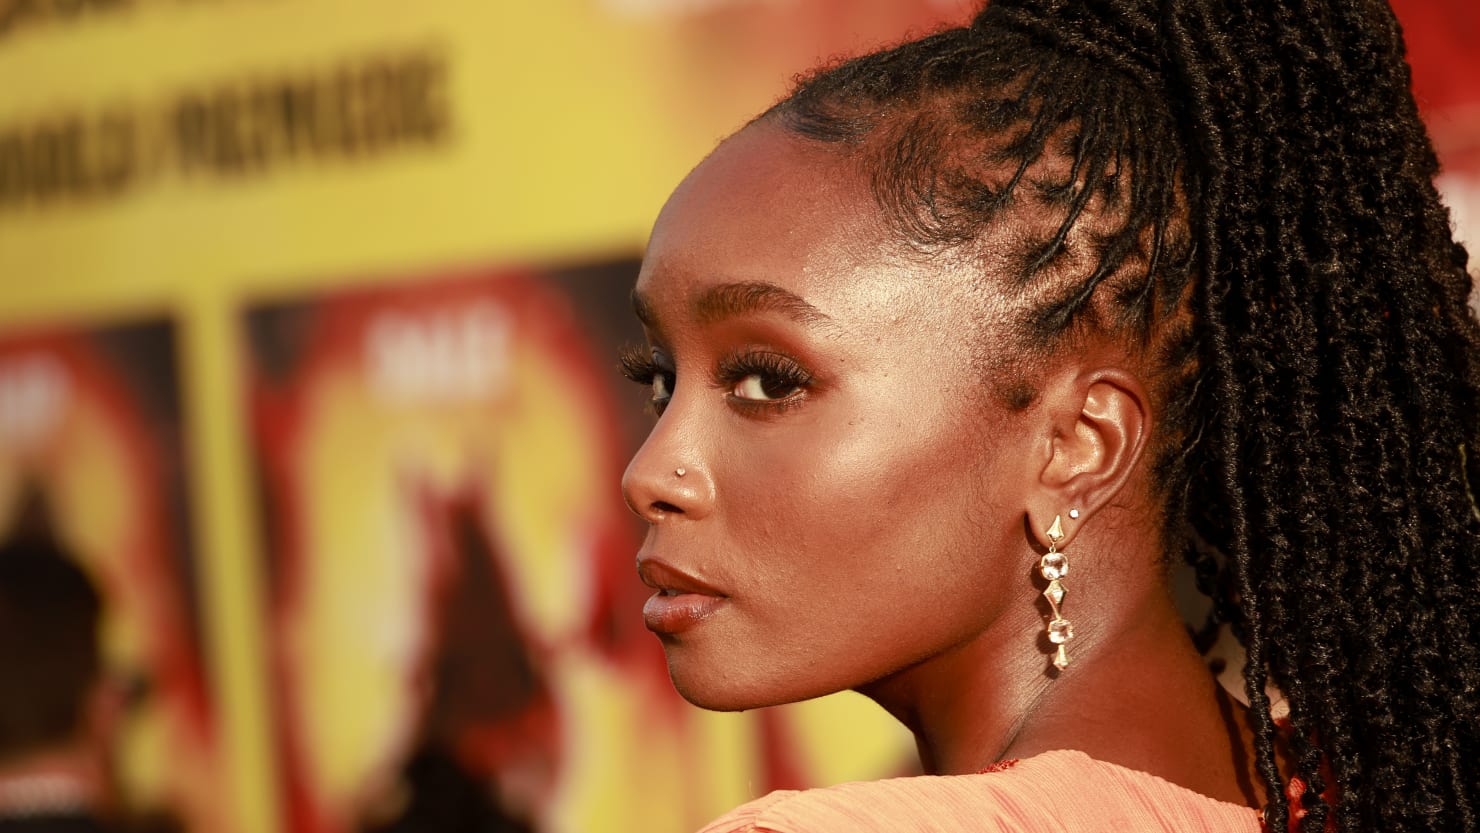 KiKi Layne Says Most of Her Scenes Were Cut From 'Don't Worry Darling'